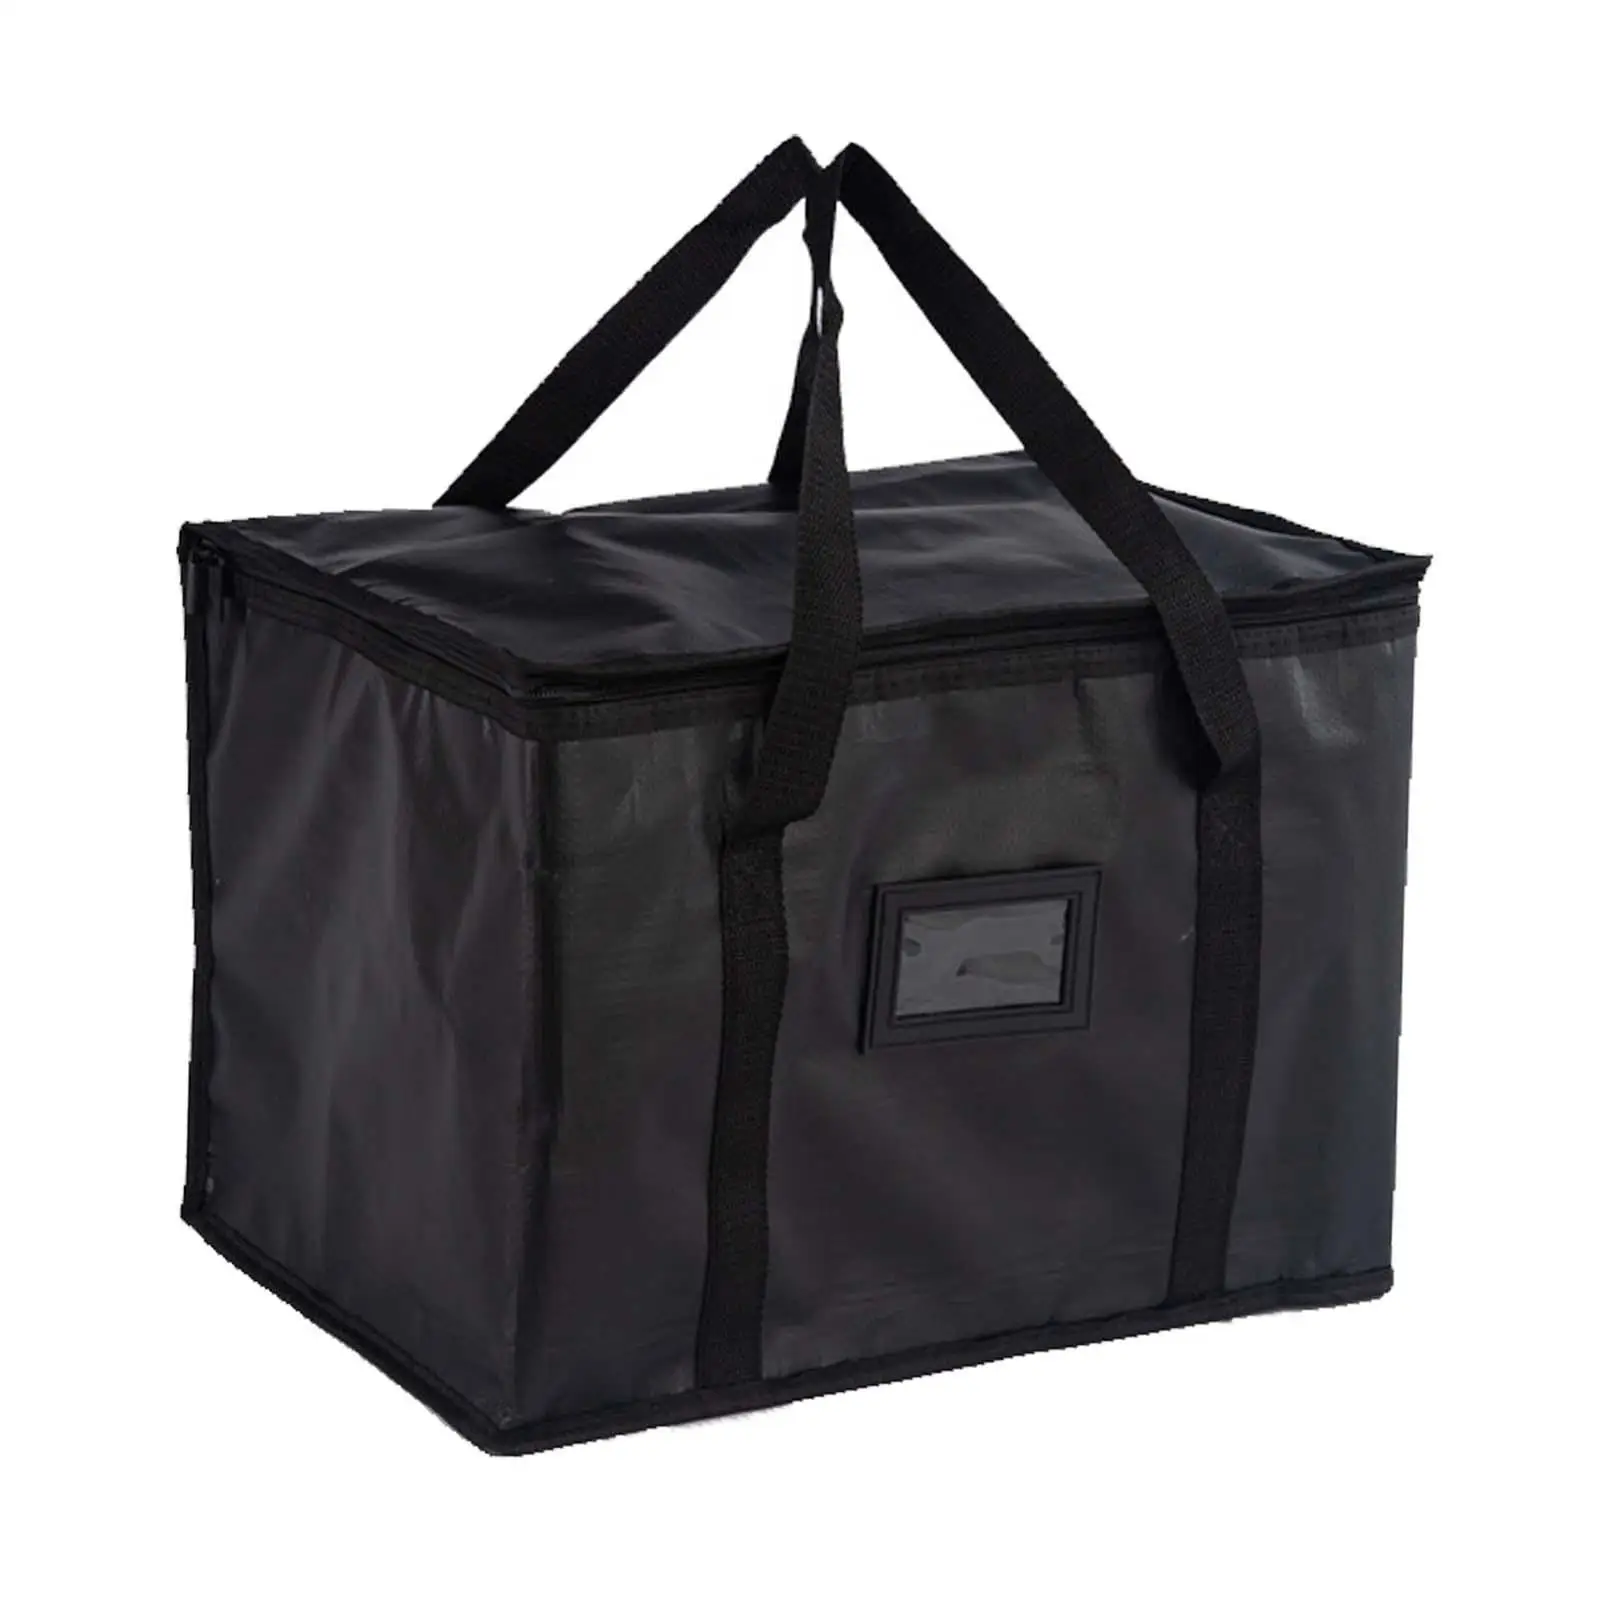 Insulated Cooler Bag Black 20wx15HX14D Inches with Zipper Closure Reusable Shopping Bag for Picnic Fishing BBQ Catering Outdoors